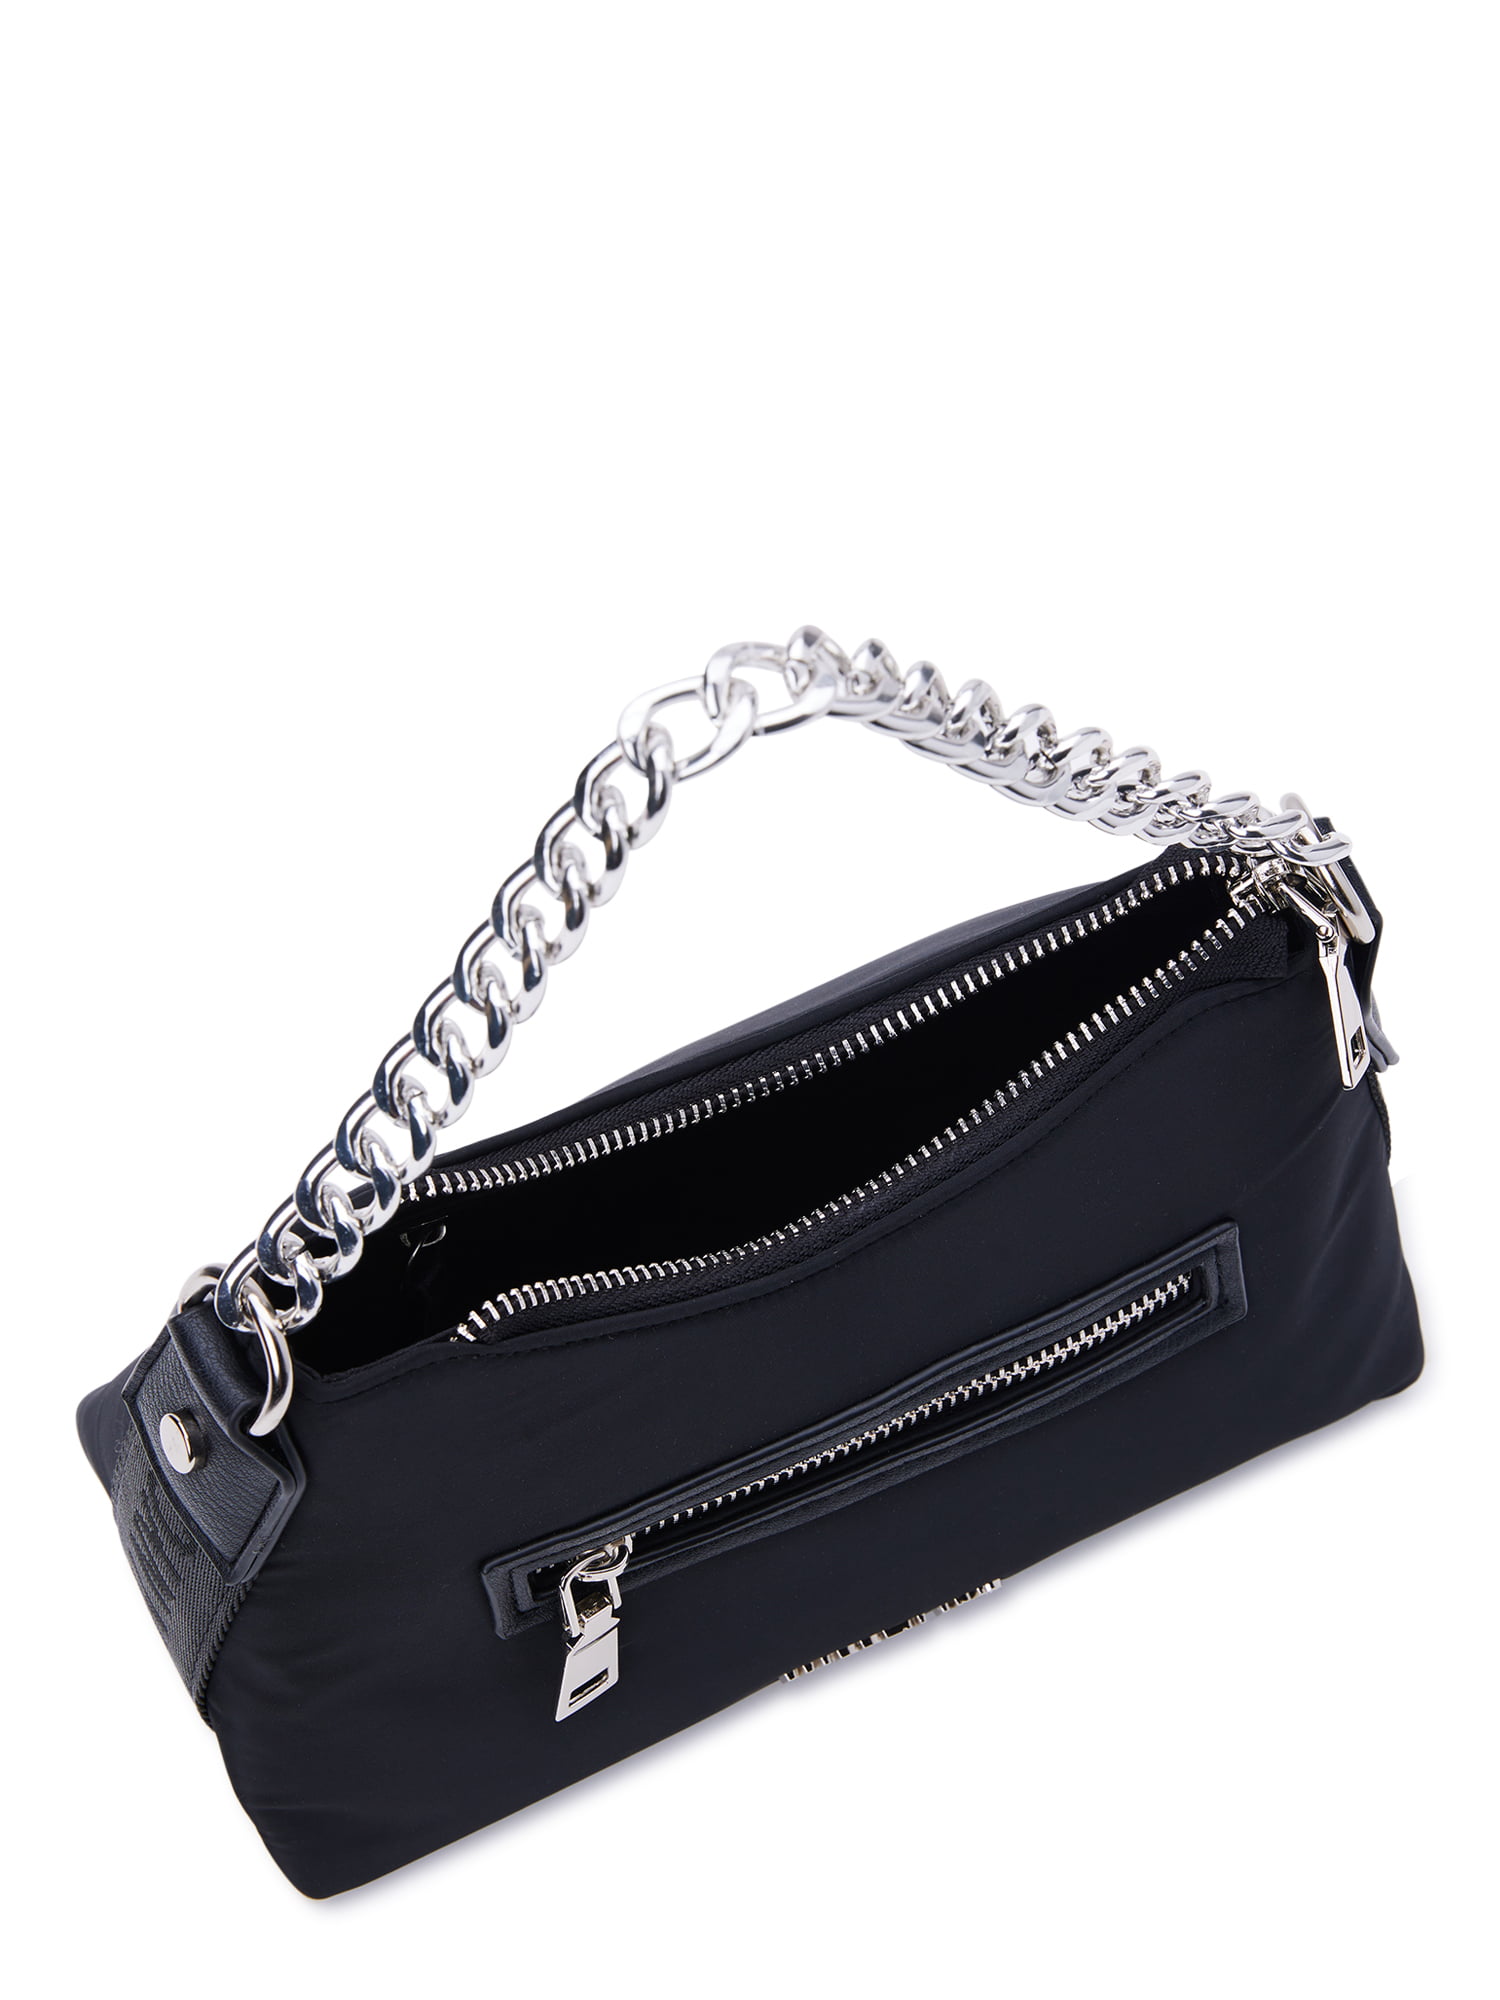 Black and Friday Deals 50% Off Clear Dealovy Nylon Crossbody Bag,  Lightweight Crossbody Bag With Multiple Pockets And One Shoulder Nylon  Fabric For Women - Walmart.com